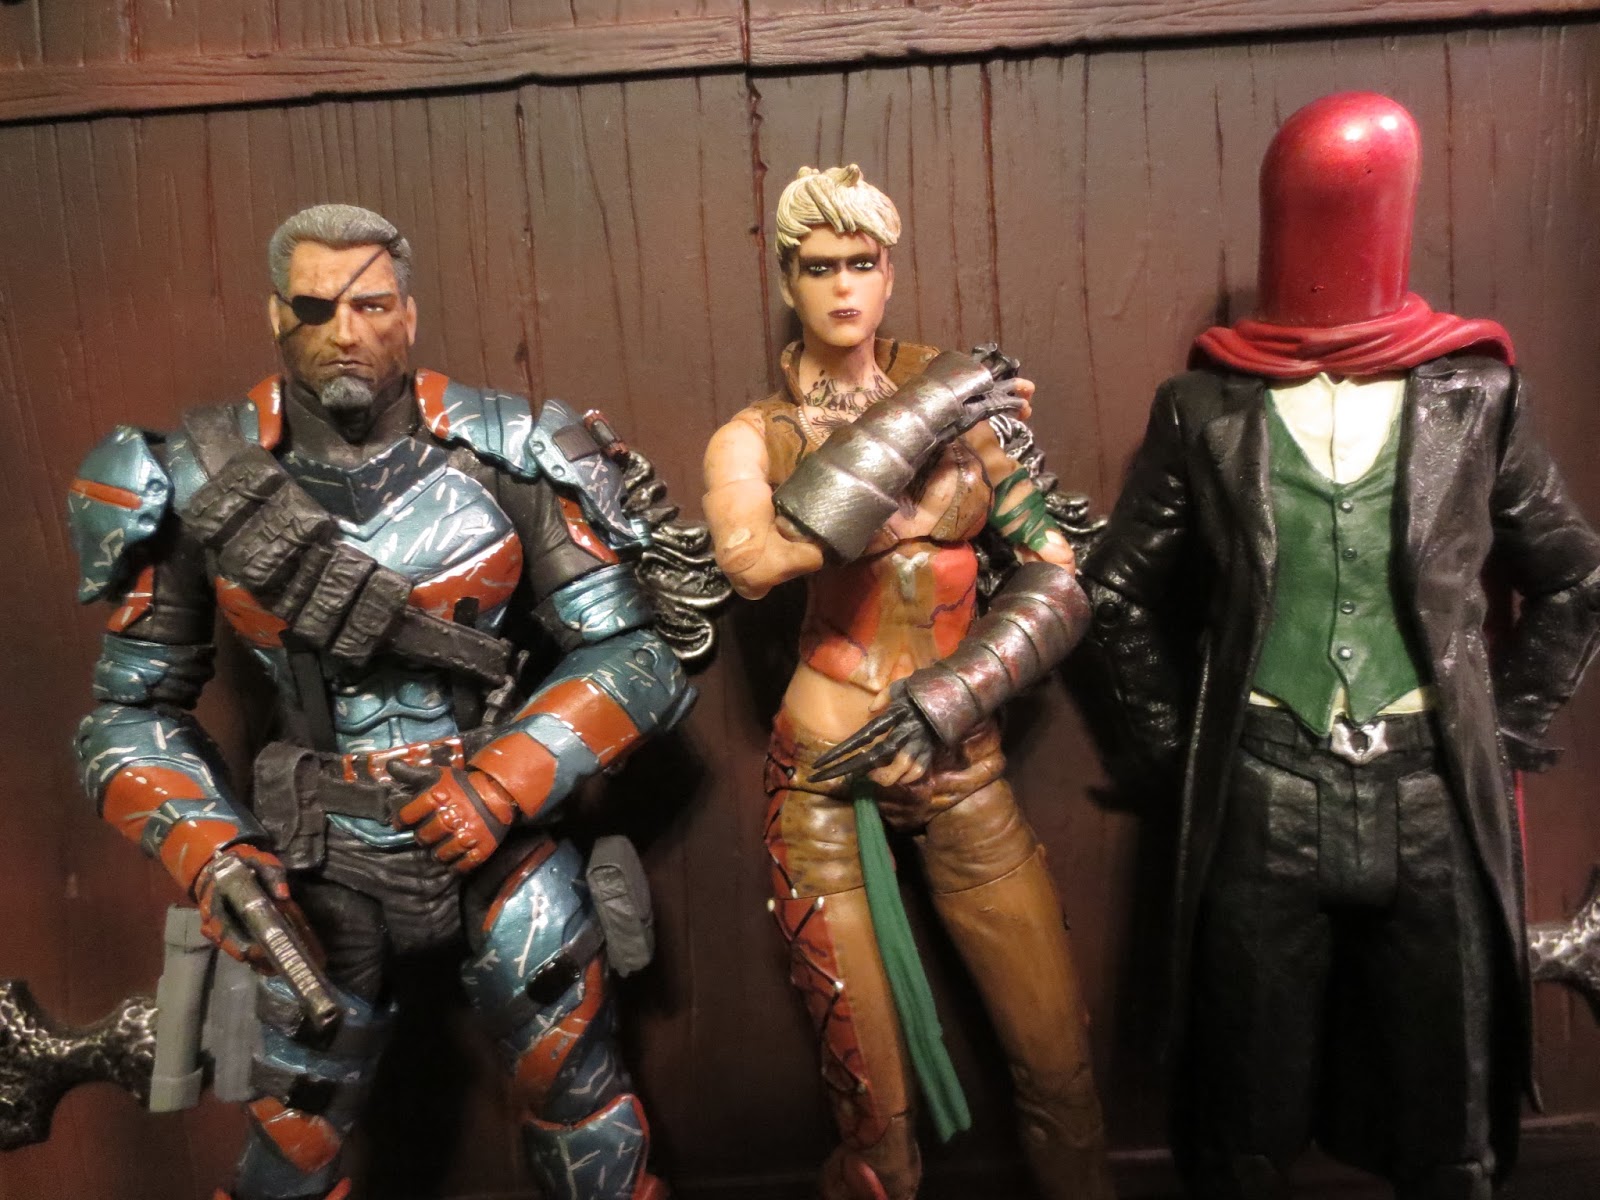 Action Figure Barbecue: Action Figure Review: The Joker as Red Hood, Copperhead, & Deathstroke (Unmasked) Action Figure 3-Pack Batman: Arkham Origins by DC